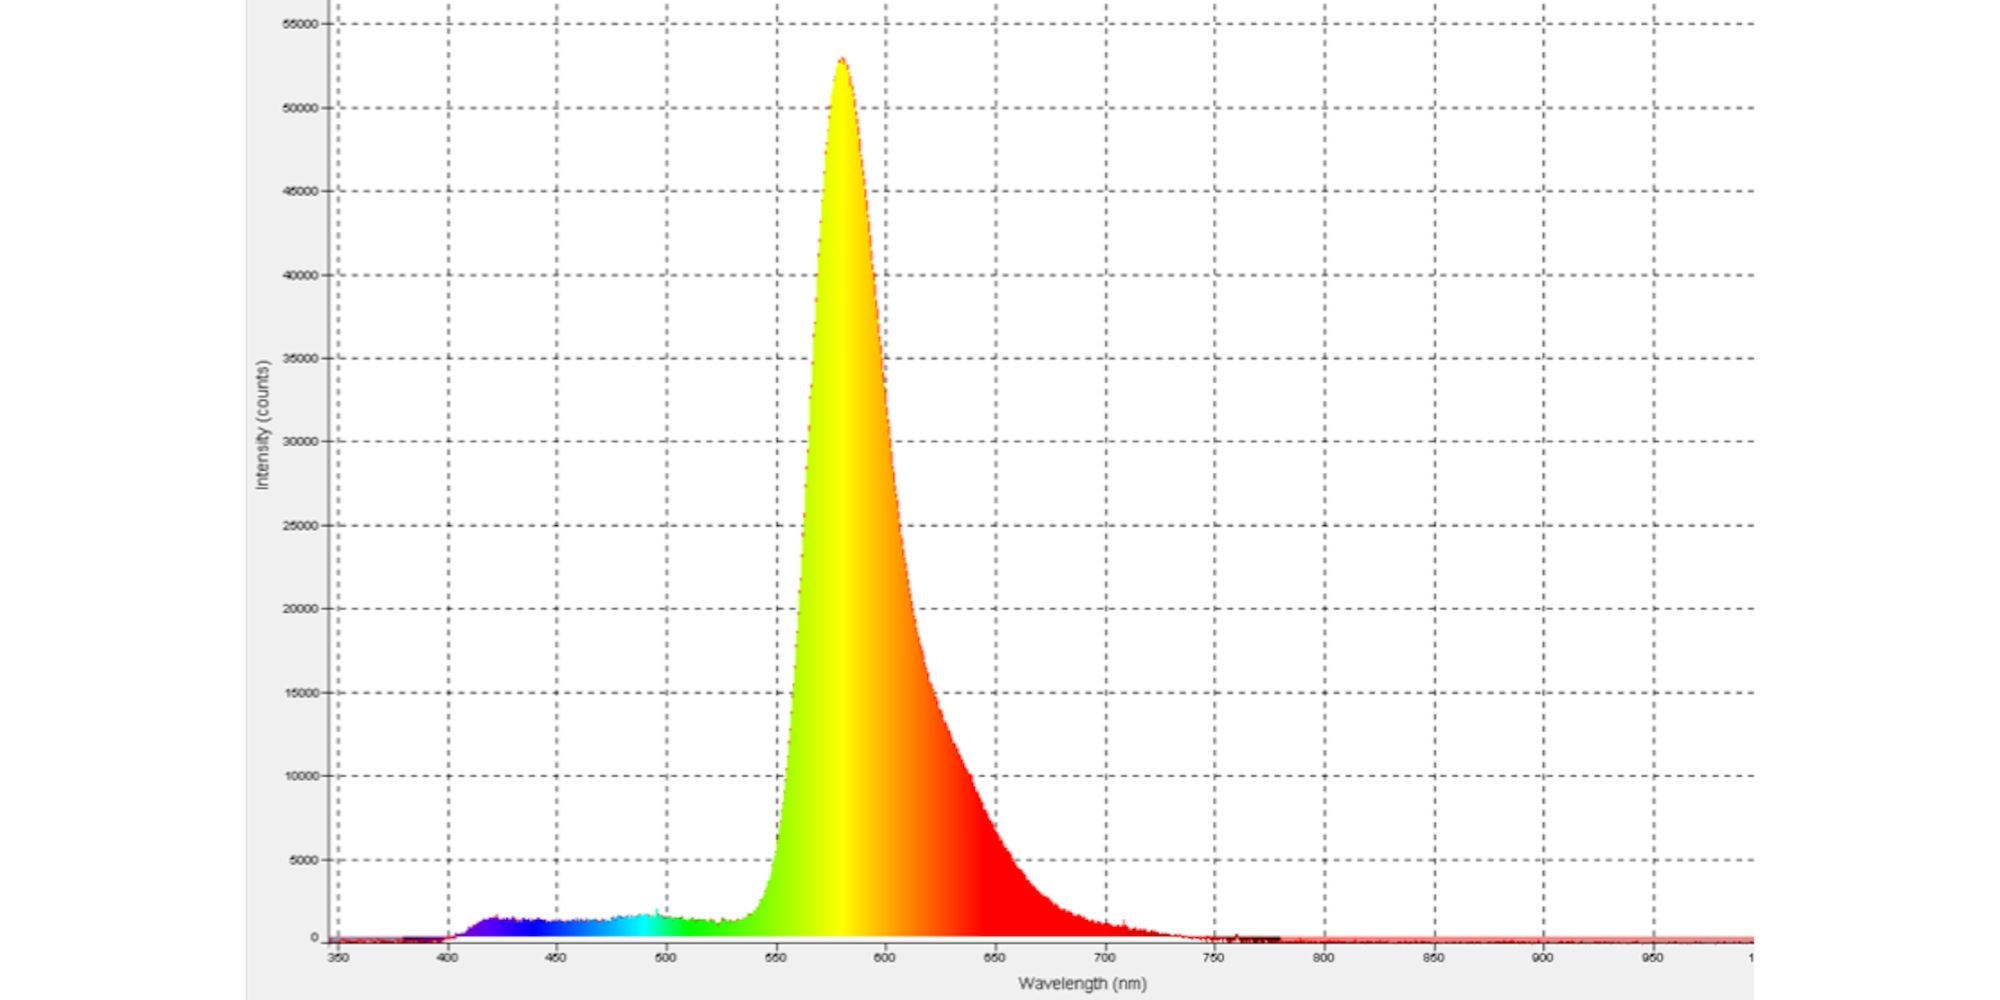 Fluorescence measurement of Rhodamine dye using the cuvette holder on the OPS.